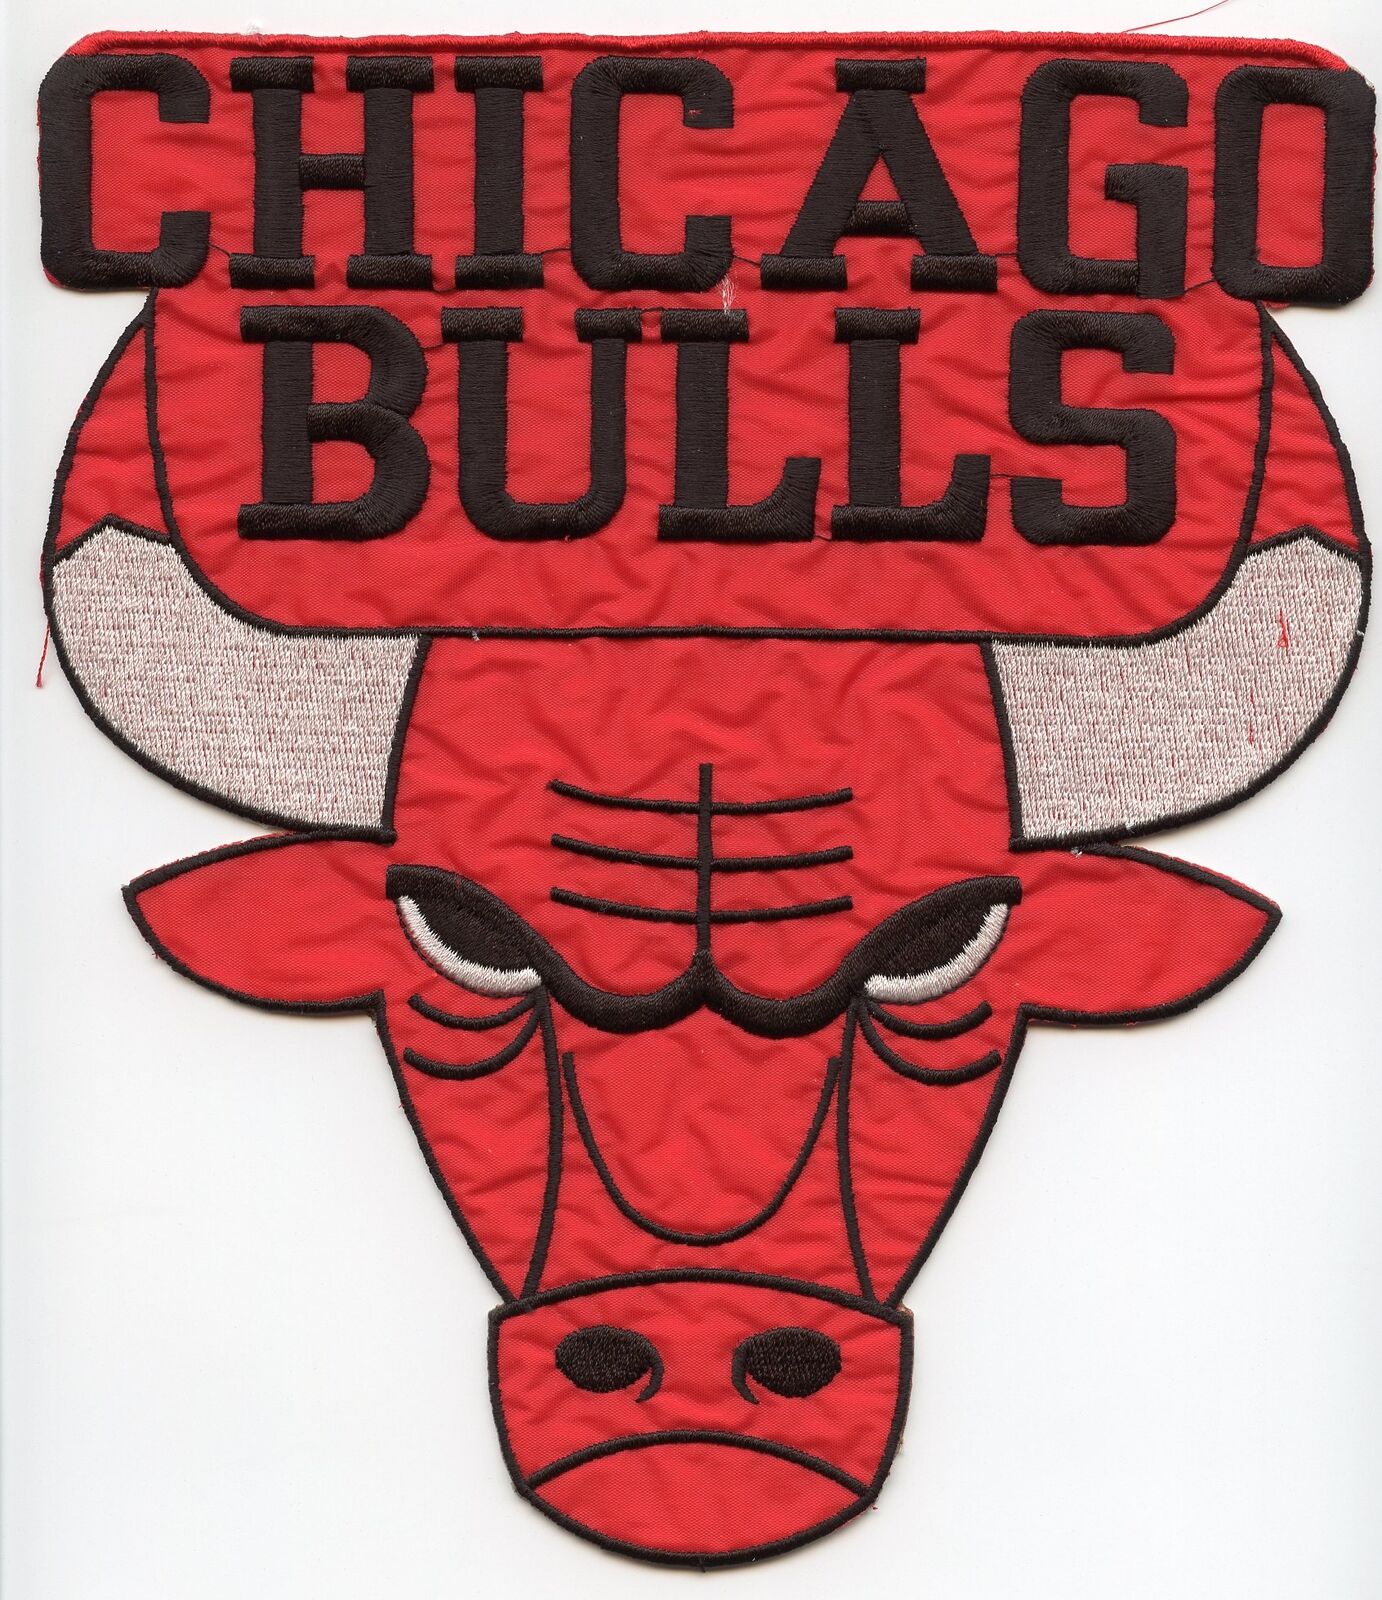 NBA CHICAGO BULLS Logo Emblem Embroidered Red Horns Iron On Patch 8" x 9" Image 1